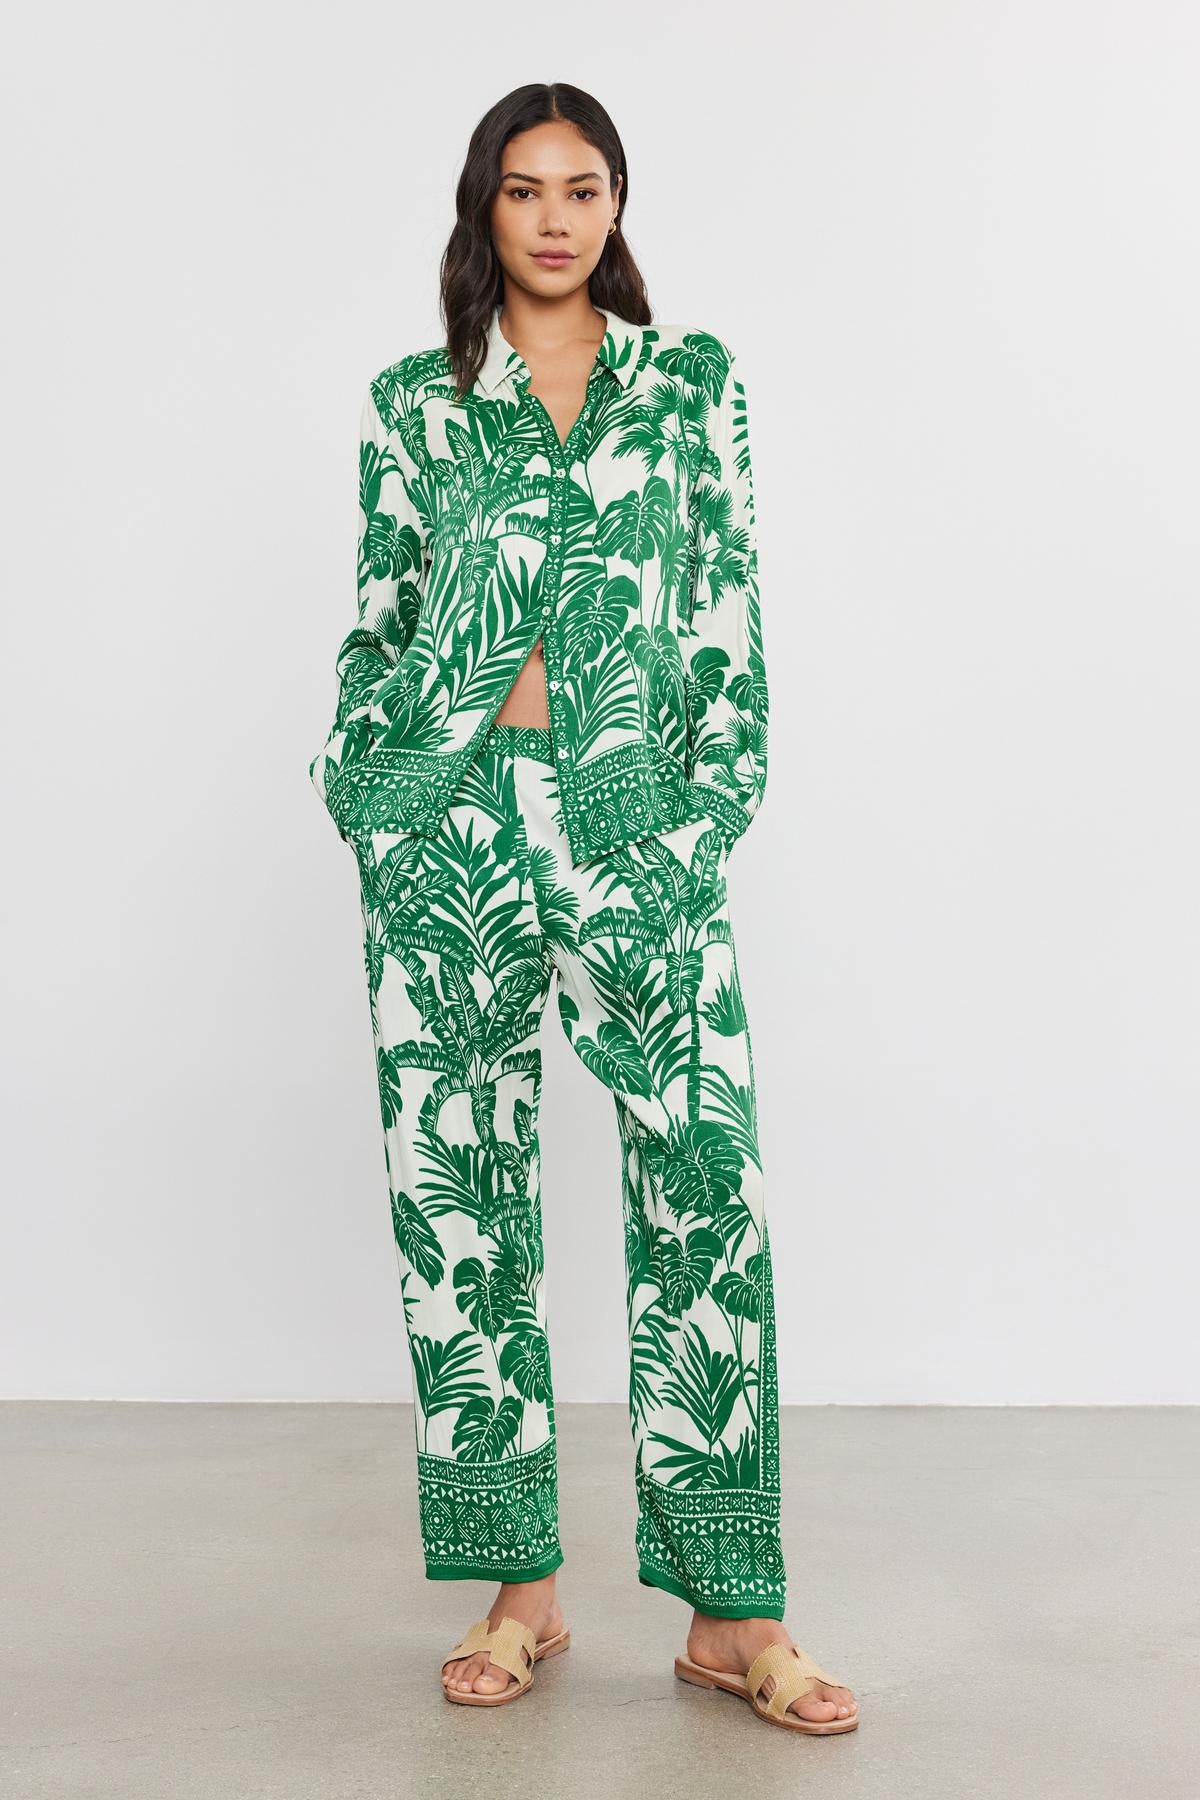   A woman wearing a green and white palm print pantsuit from Velvet by Graham & Spencer, with a matching crop top, standing against a plain backdrop, paired with beige sandals. 